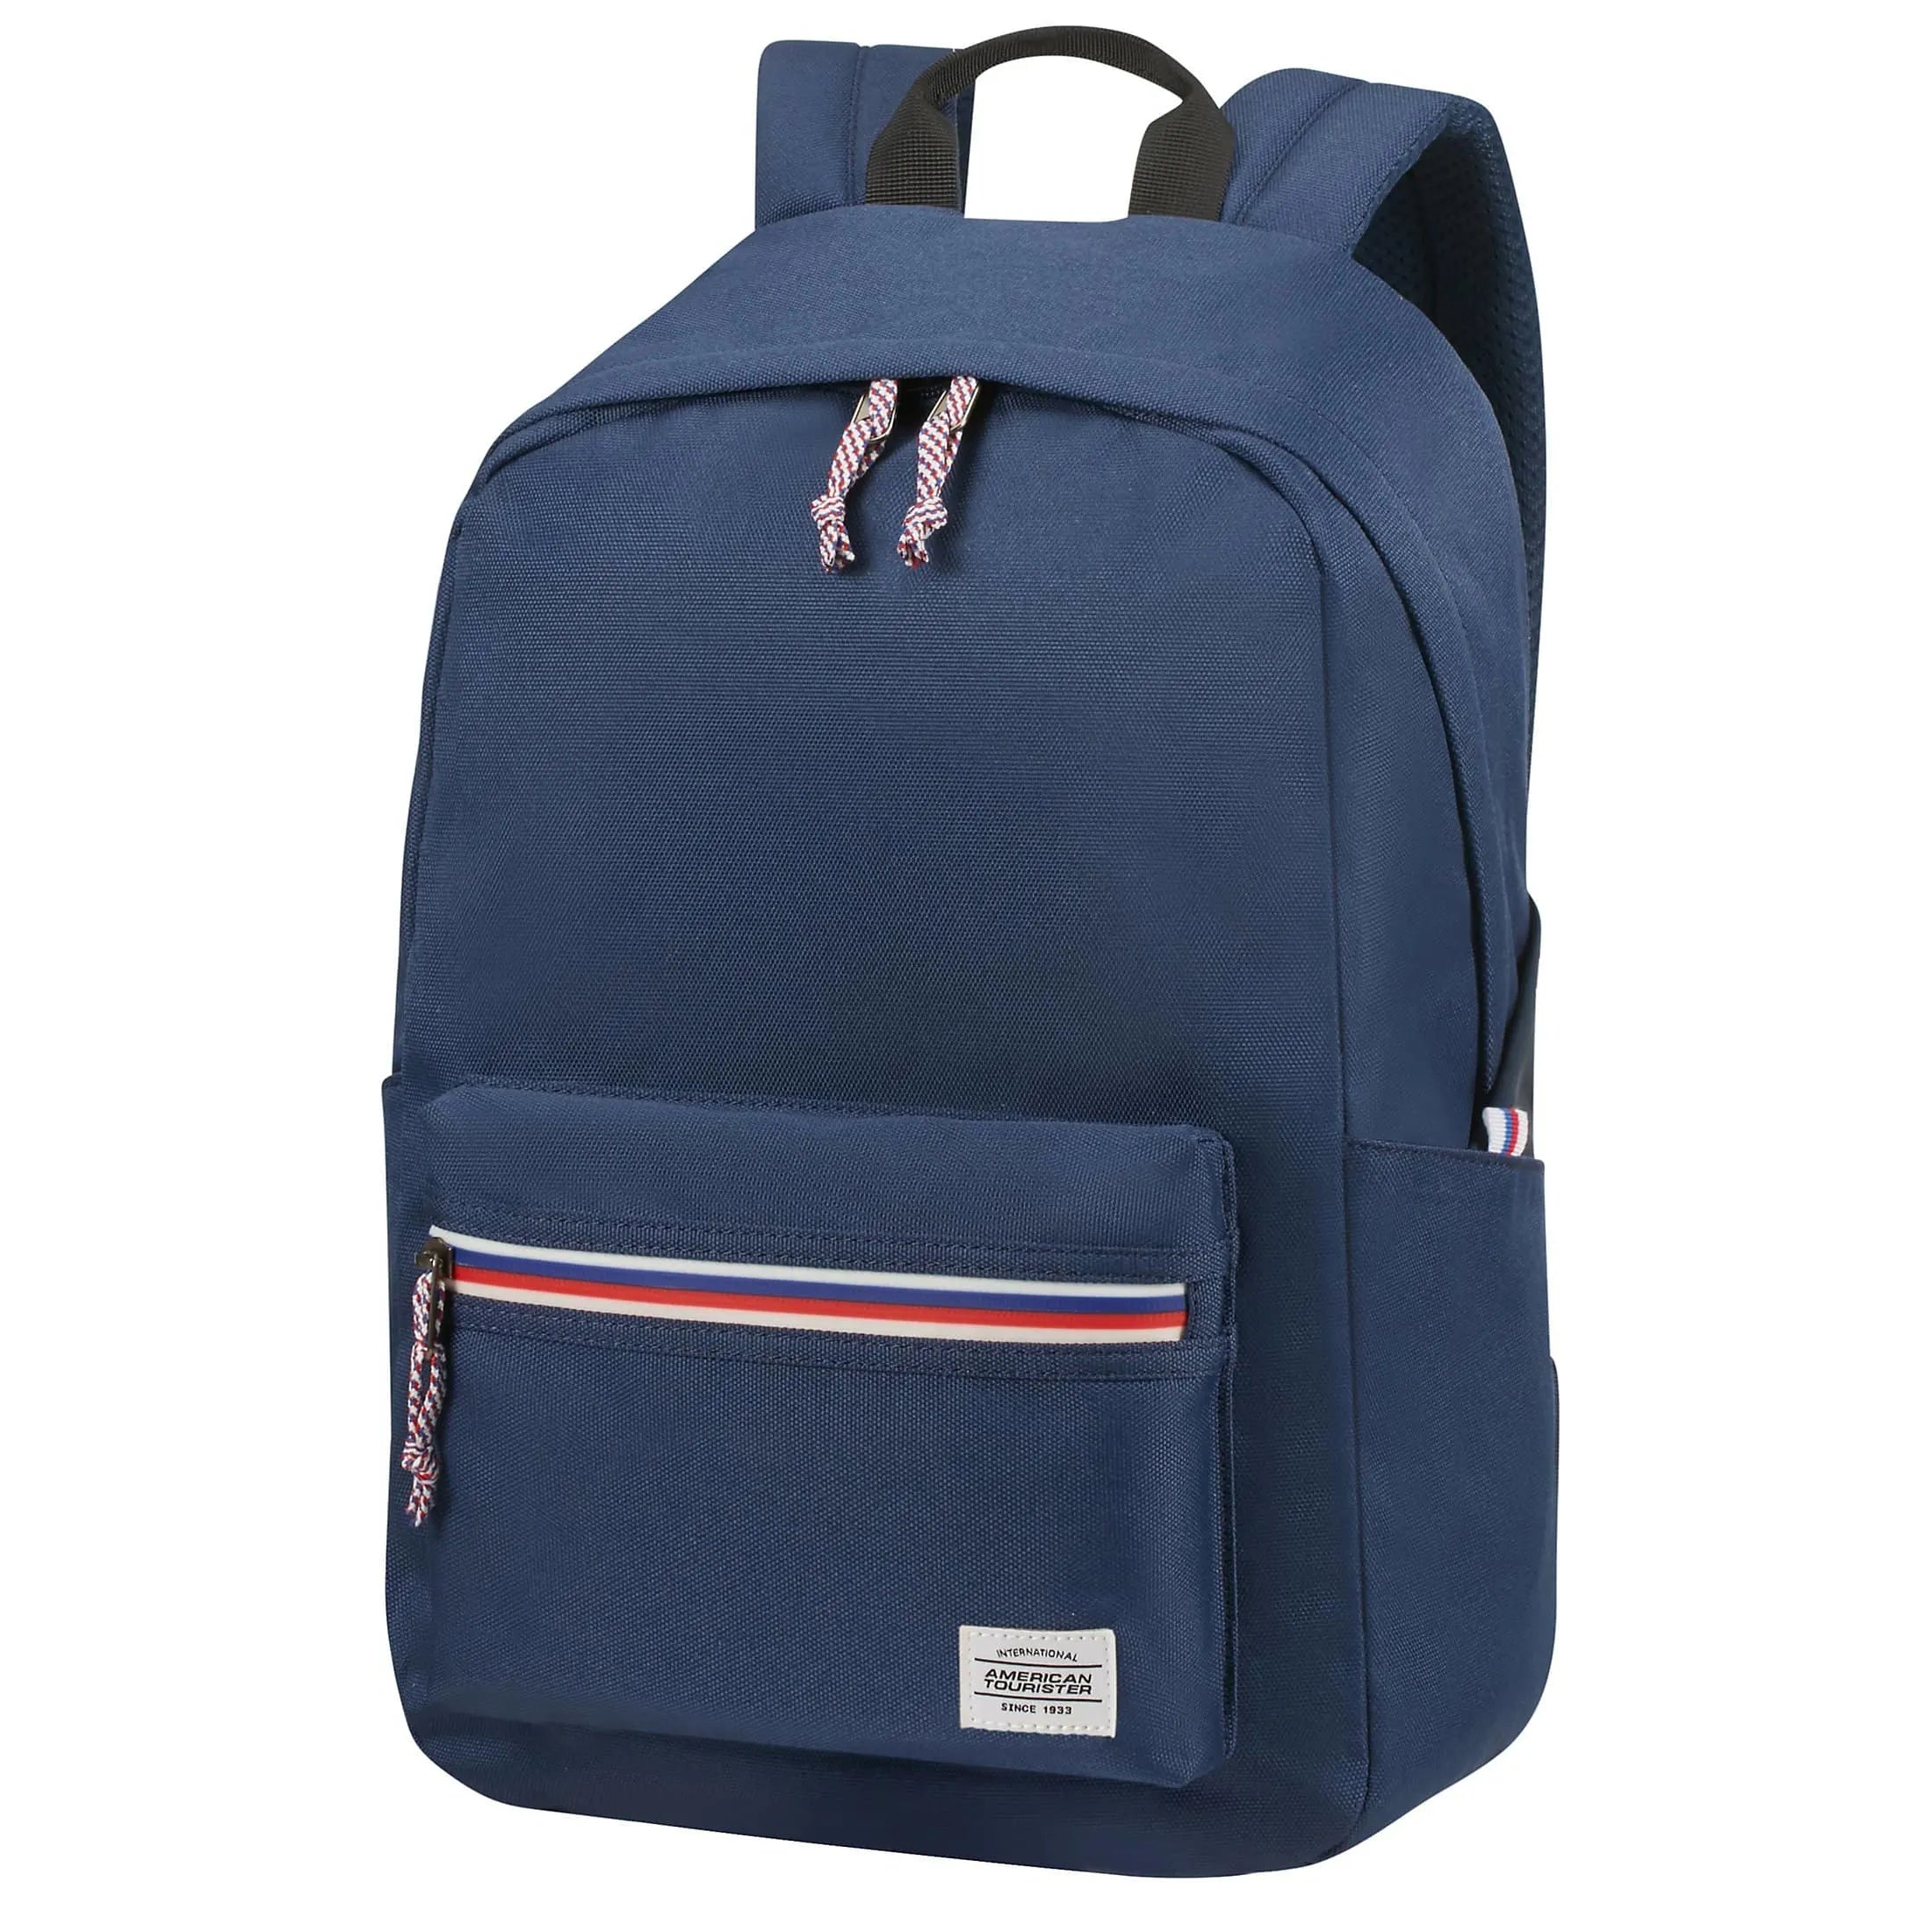 American Tourister Upbeat leisure backpack 42 cm - navy